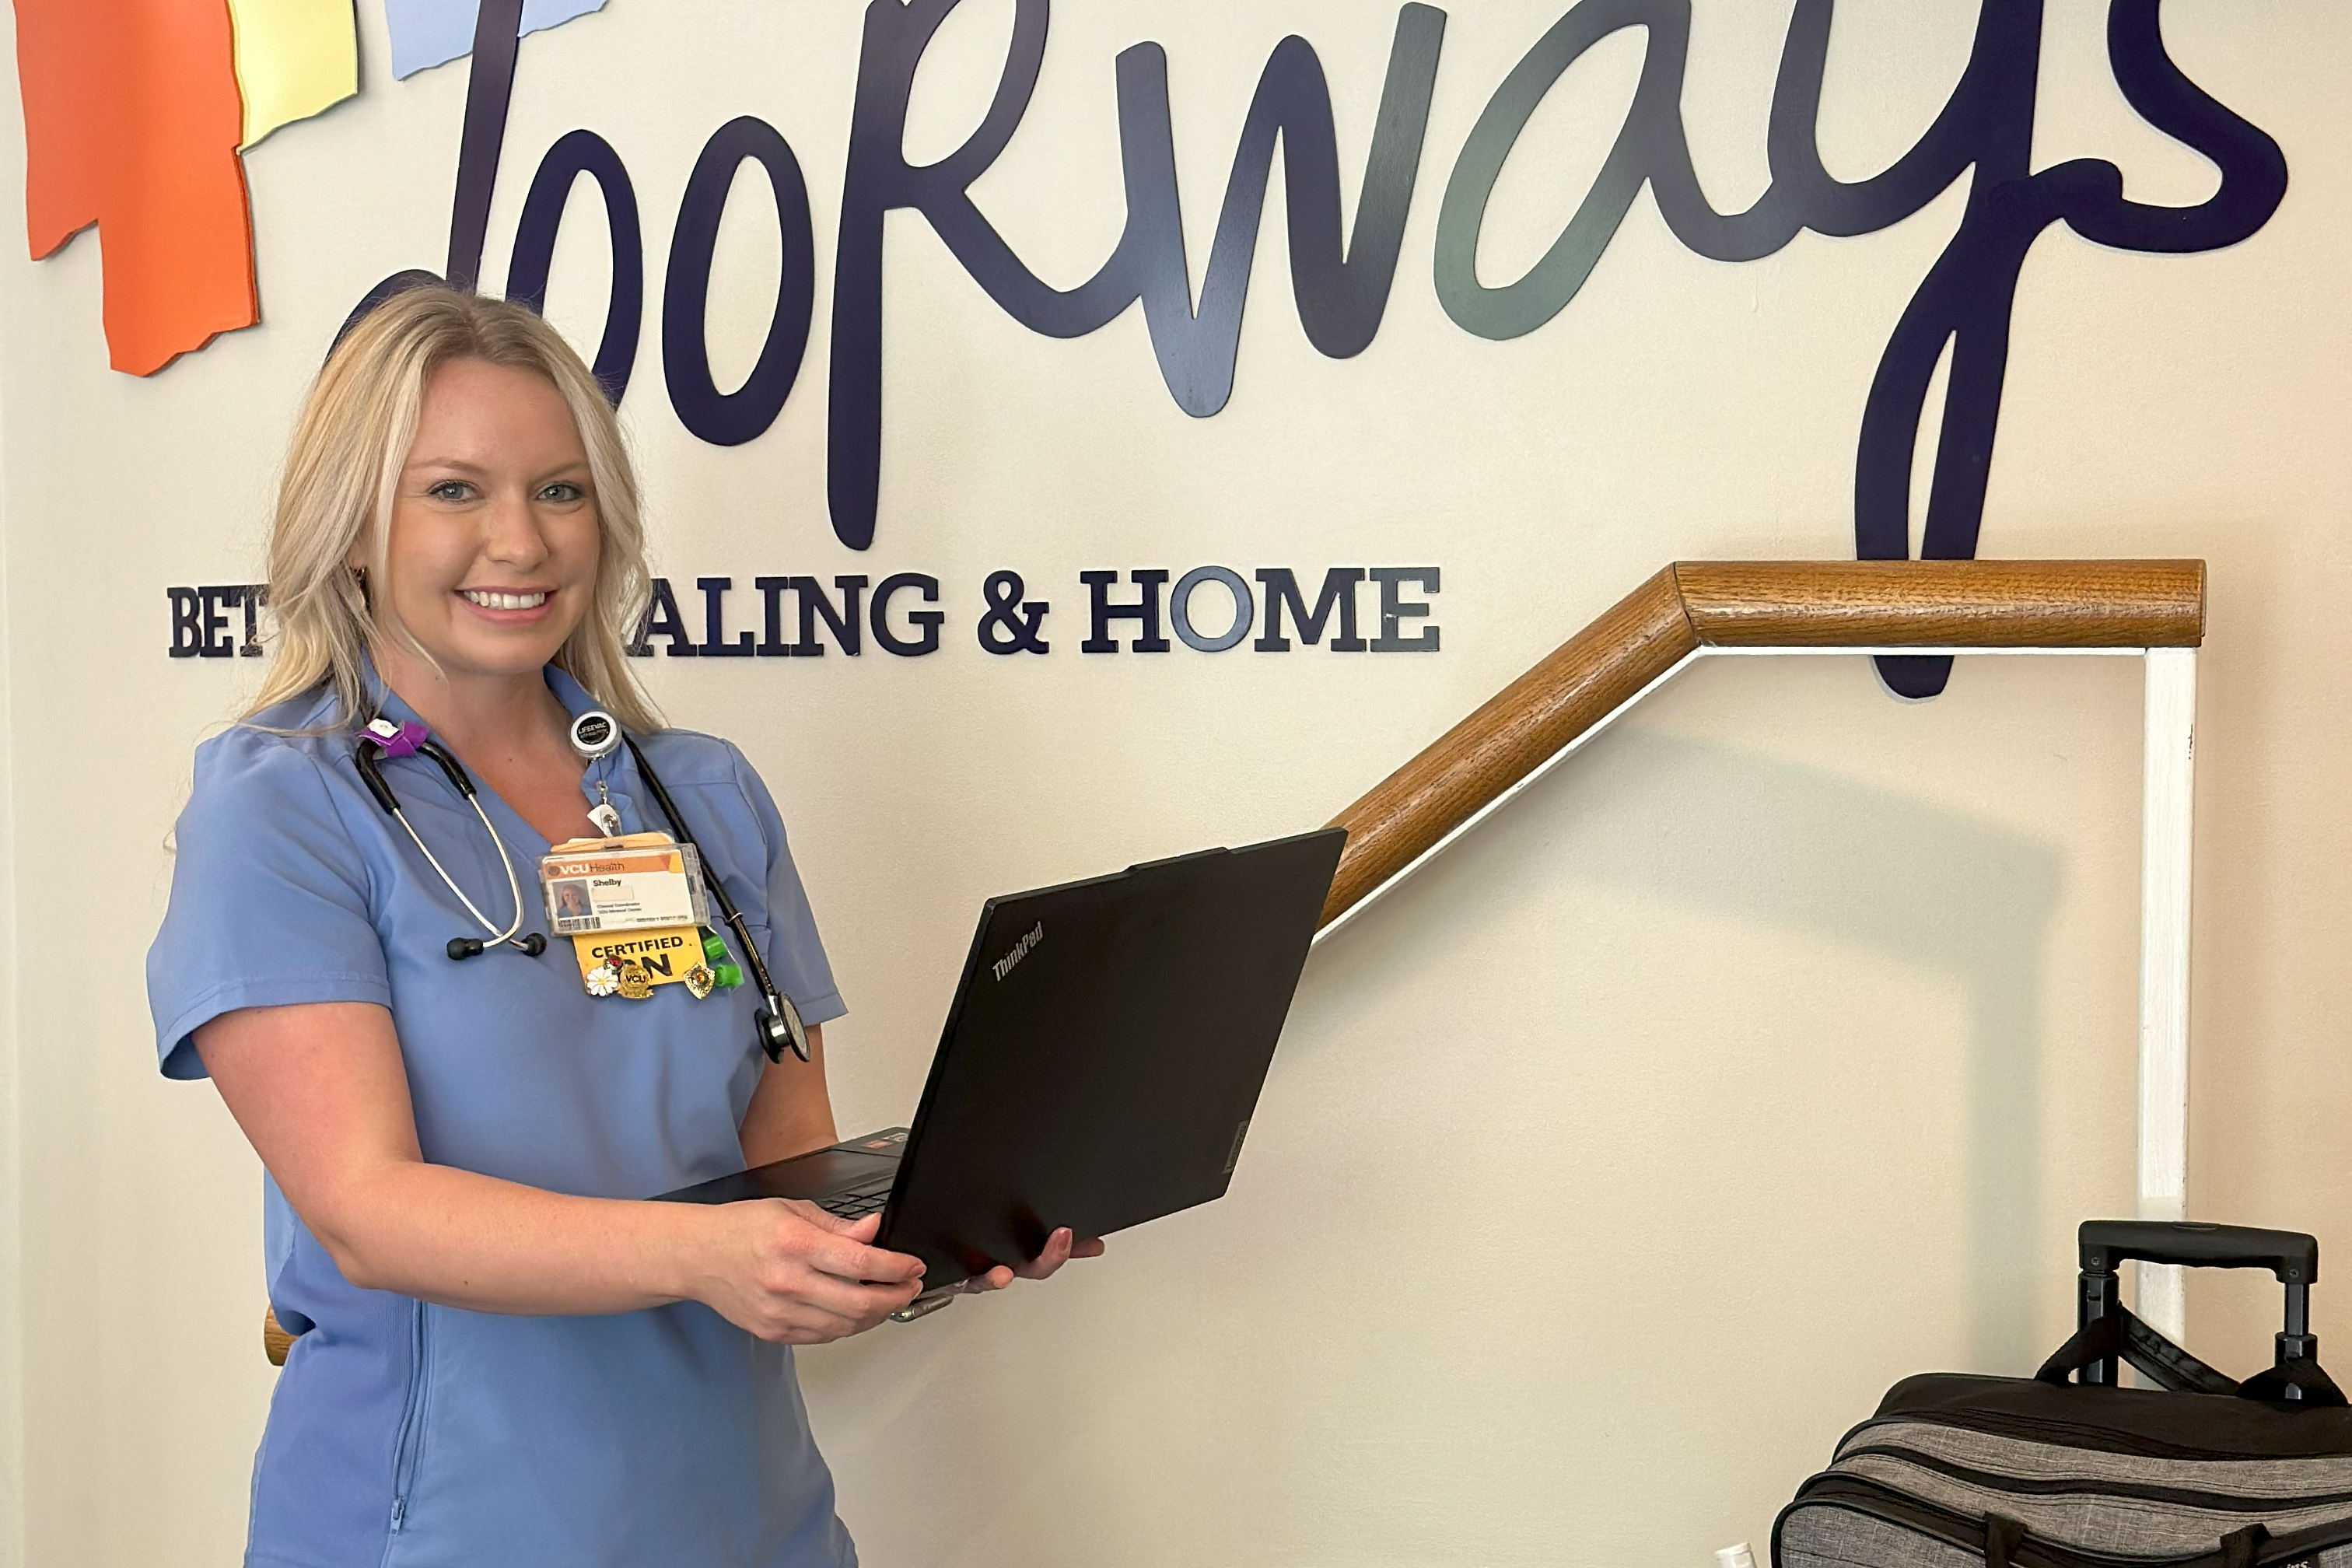 a smiling adult in scrubs holds a laptop with a medical bag in from of The Doorways logo